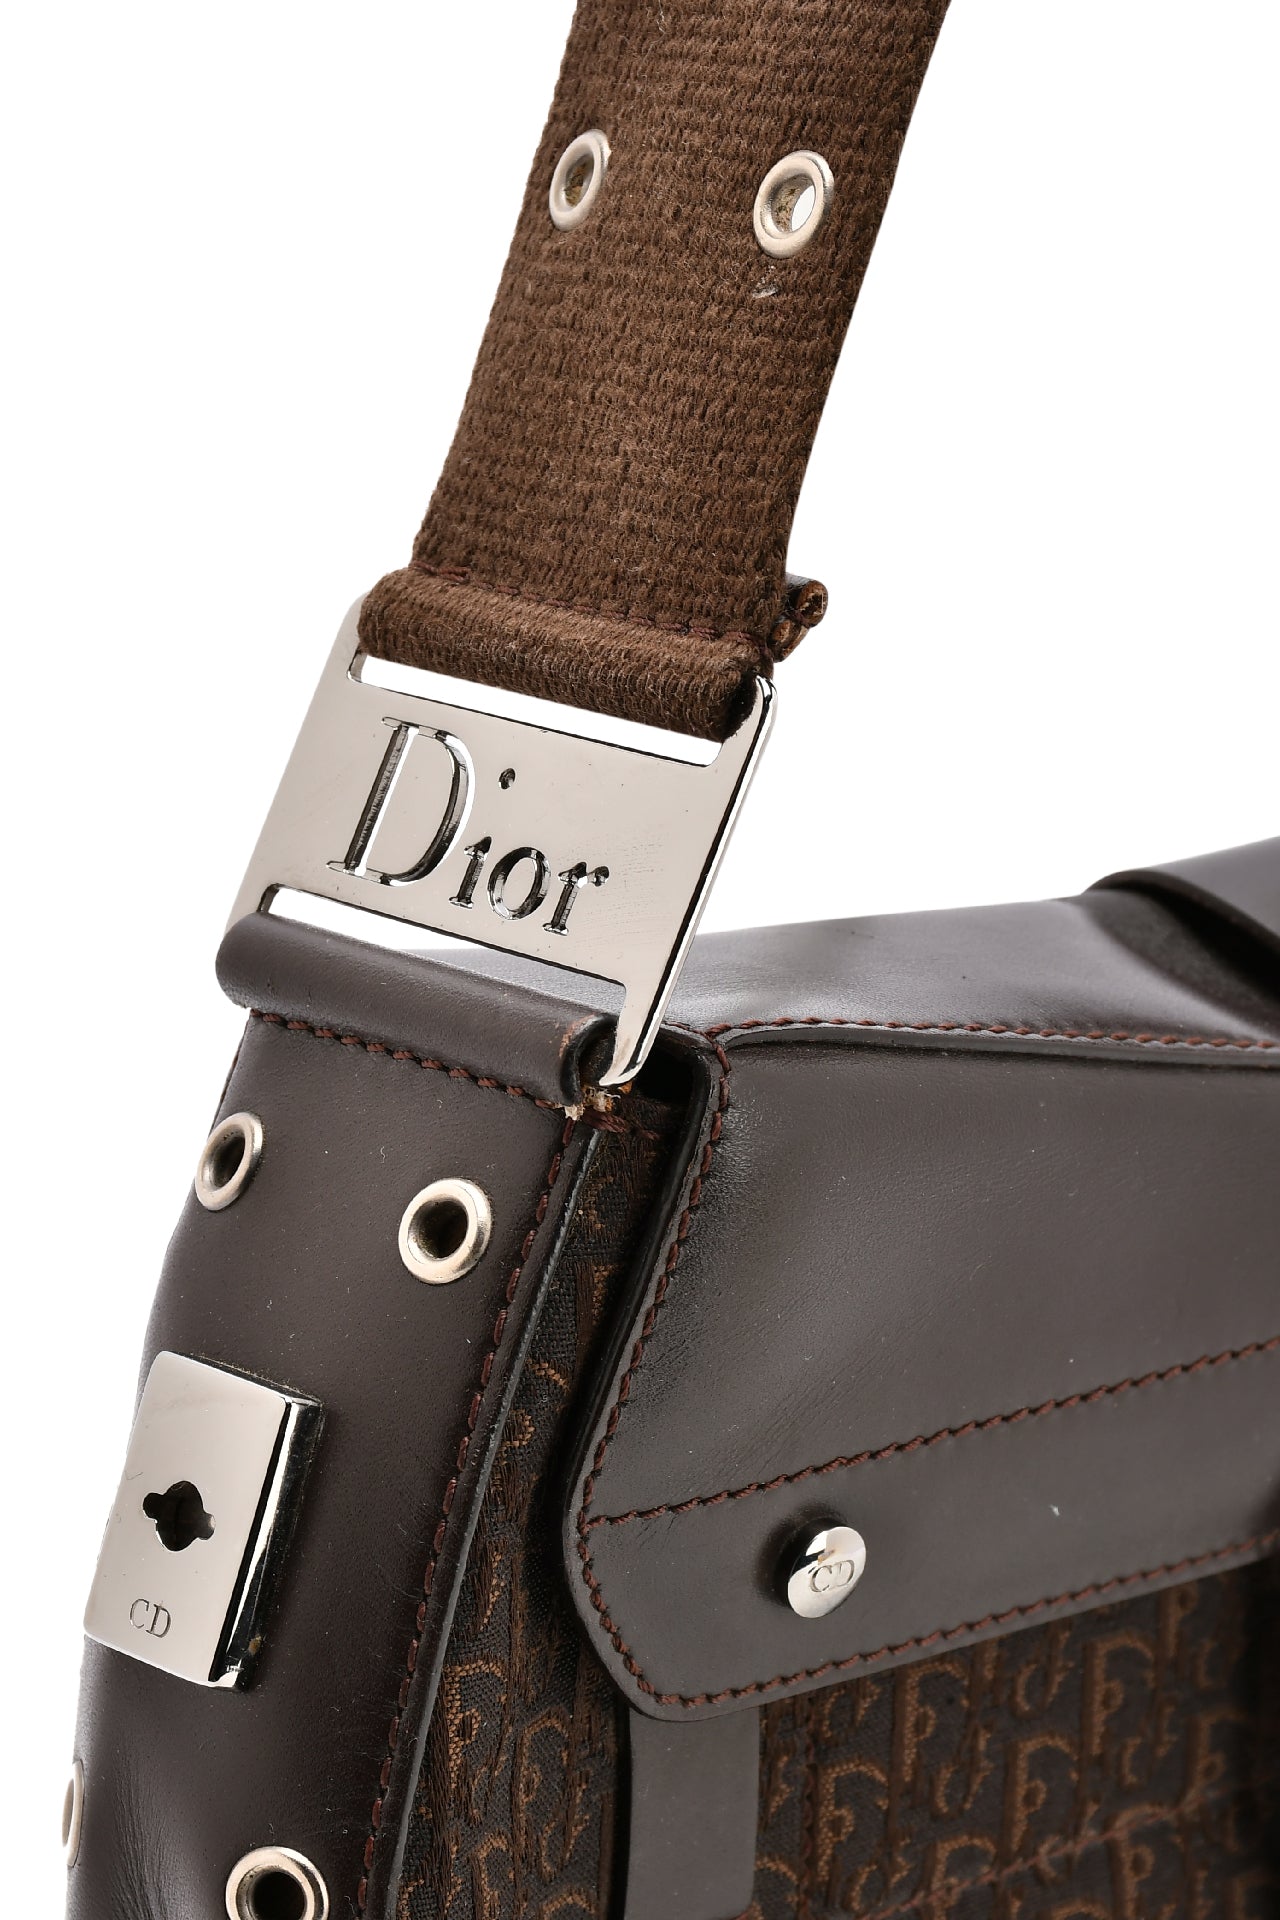 Dior Street Chic Columbus Bag Diorissimo Canvas with Leather